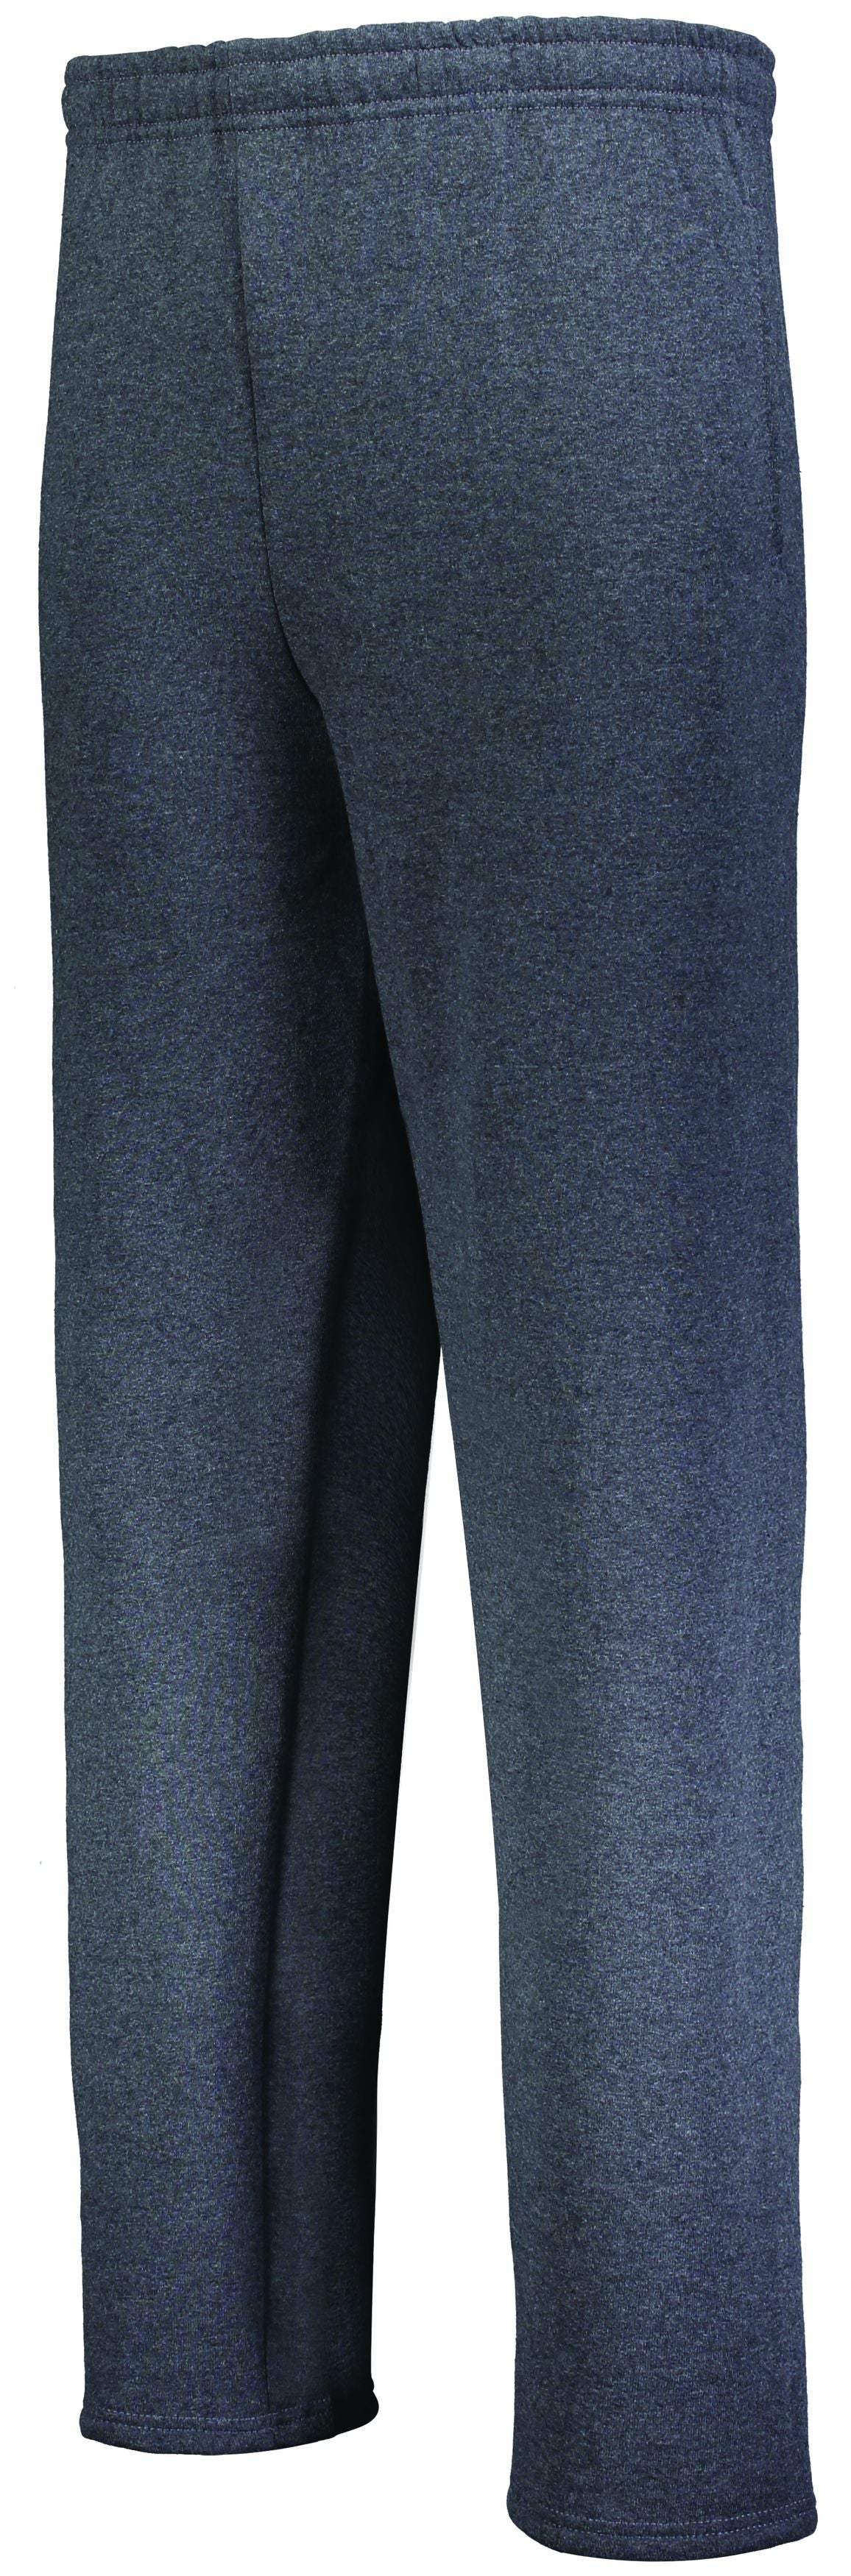 Russell Athletic Men's Dri-Power Pocketed Sweatpants Open Bottom - Oxford  Grey